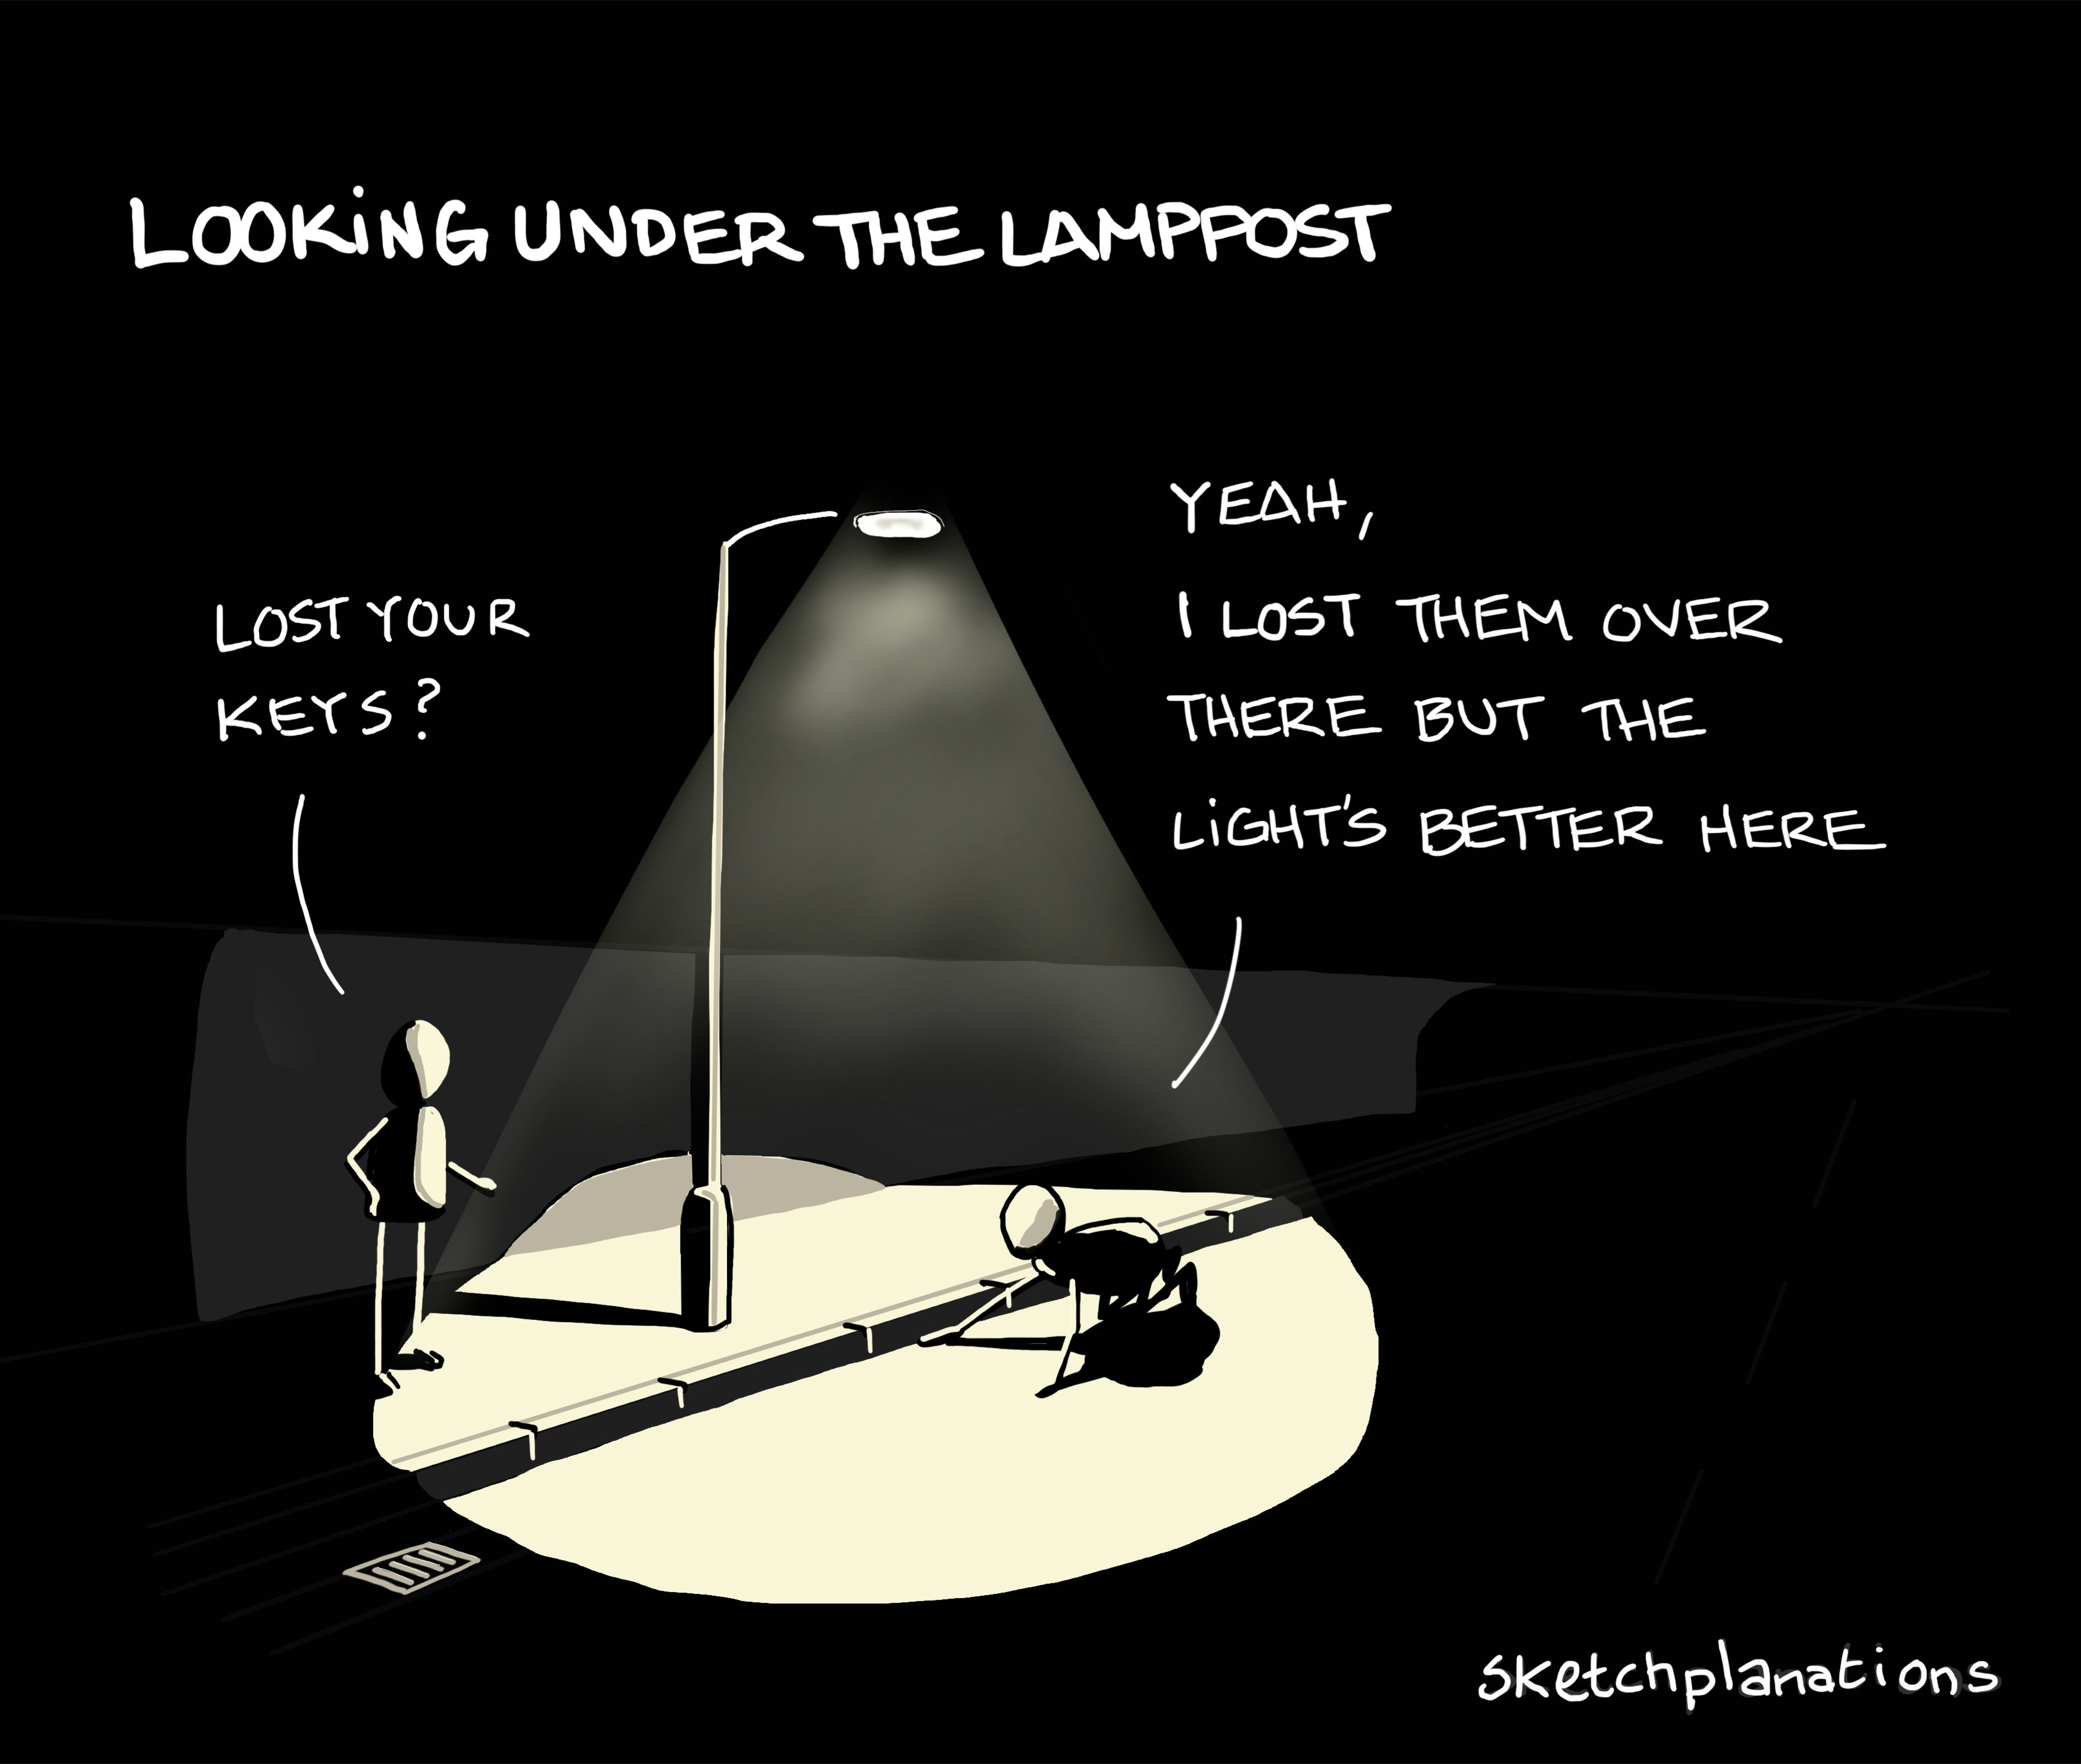 Looking under the lamppost, the streetlight effect, or the drunkard's search: a person asks someone scrabbling on the floor under a lamppost at night if they've lost their keys. The person replies they lost them elsewhere, but the light's much better here.